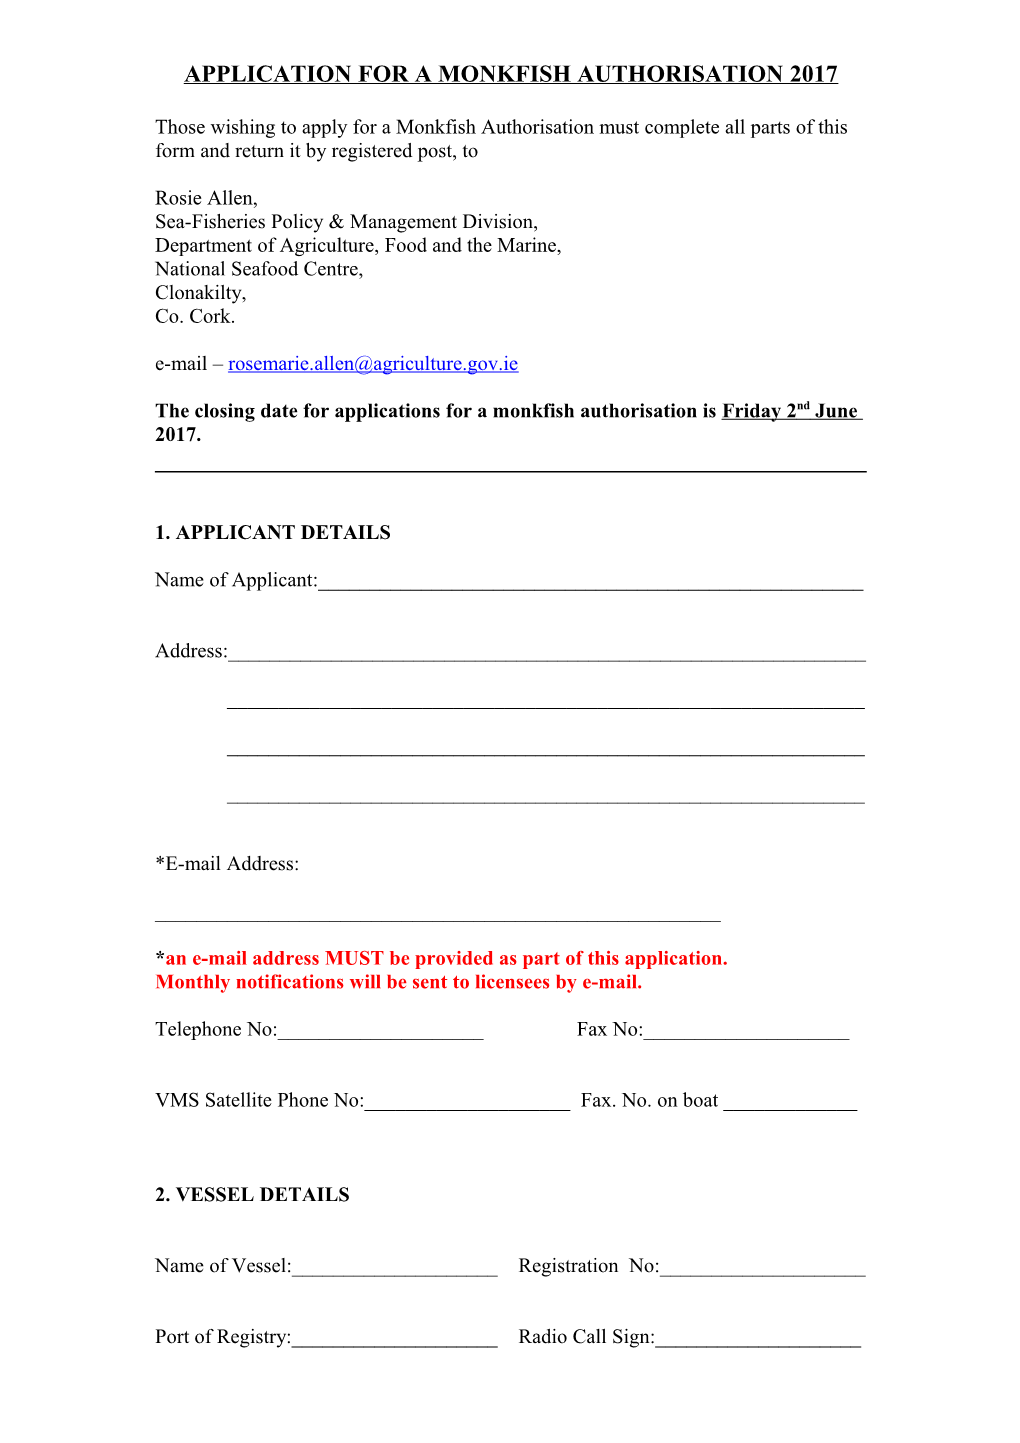 Application for a Monkfish Authorisation 2008